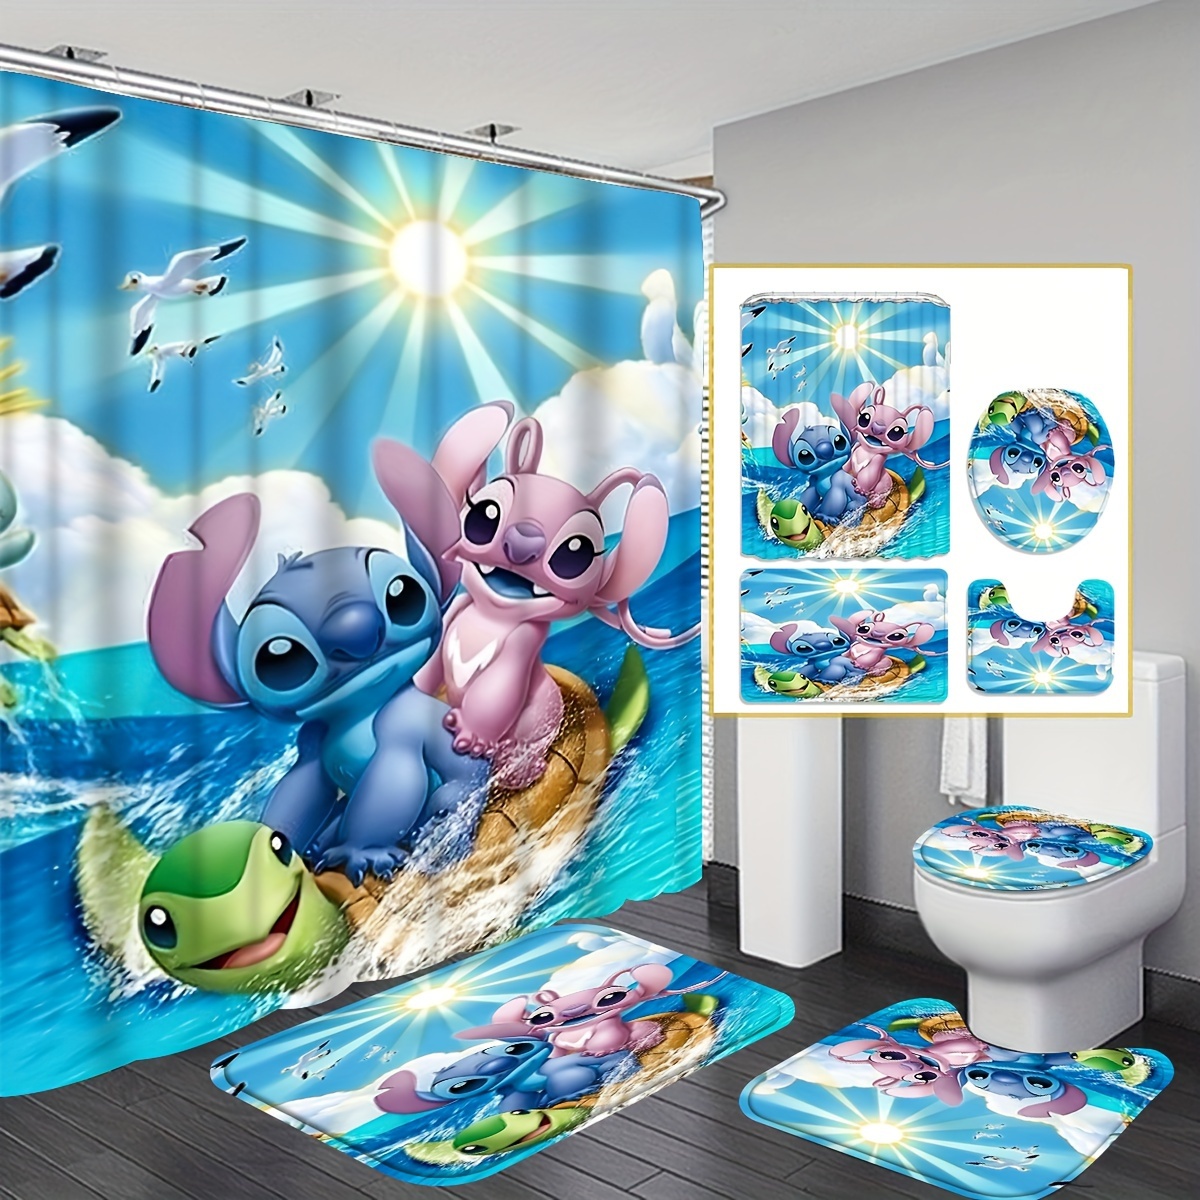 

Disney Stitch 4-piece Shower Curtain Set - Waterproof, Includes Non-slip Bath Mat, U-shaped Toilet Mat & Lid Cover With 12 Hooks - Perfect For Bathroom Decor